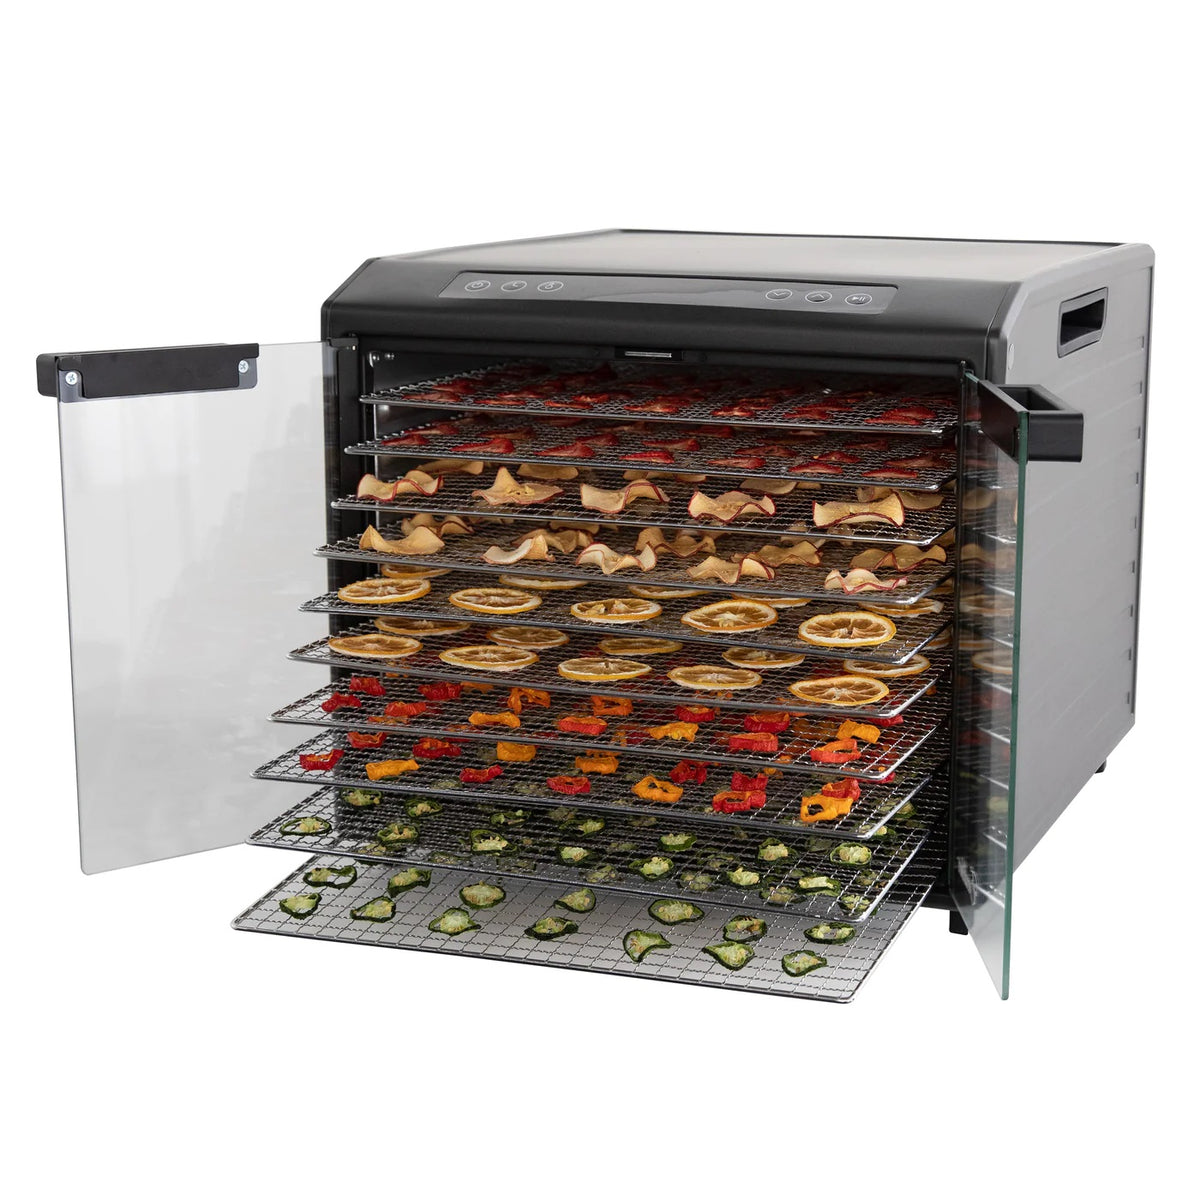 Excalibur DH10SC dehydrator with clear doors open and trays loaded with food.